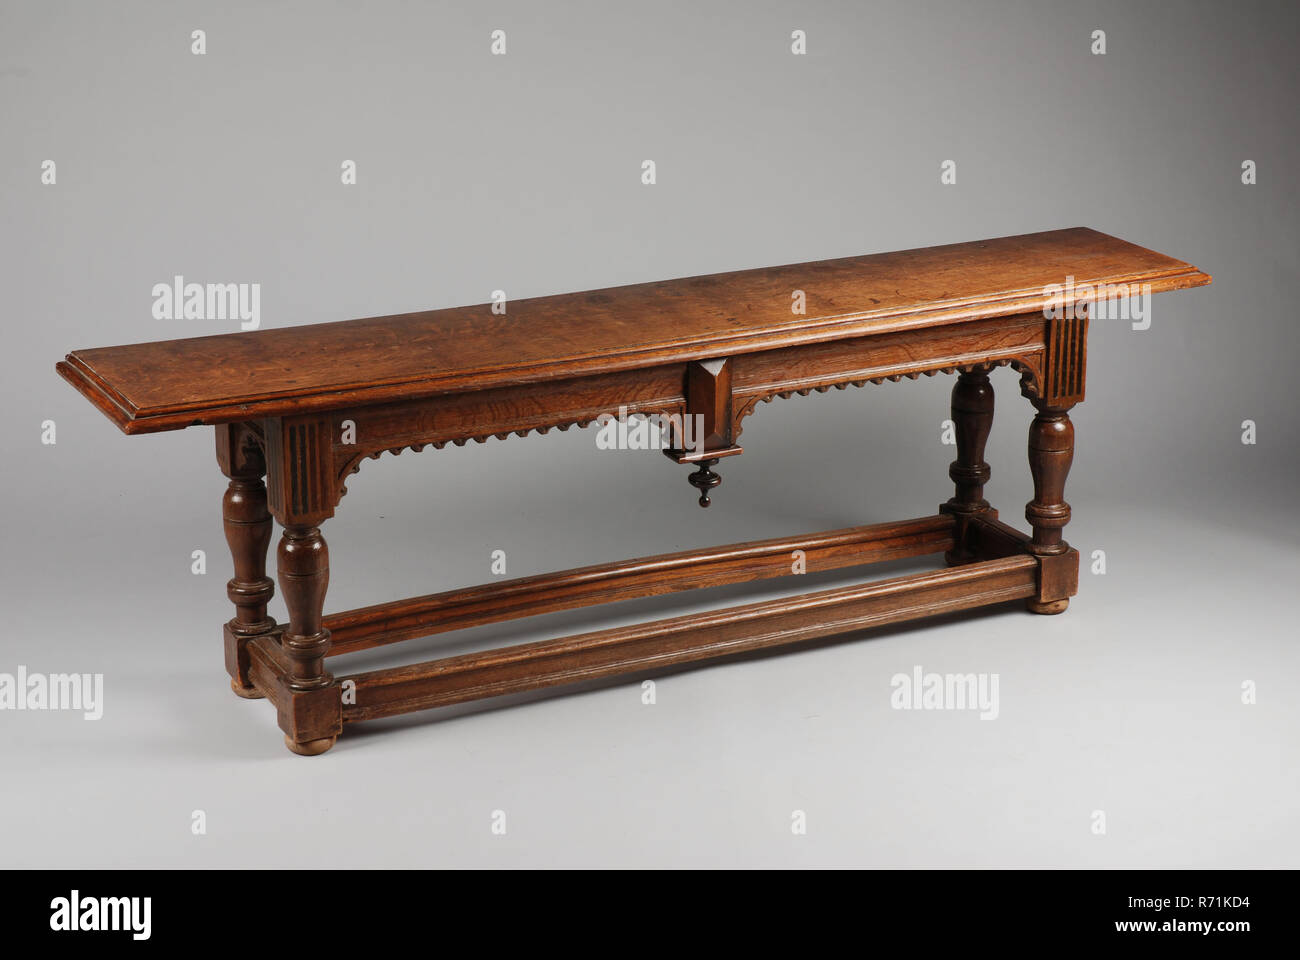 Oak renaissance bench of the Reformed Old Woman's House, bench furniture furniture interior design oak wood moore oak rosewood elmwood wood, Oak Renaissance bench with few marquetry details front with bows and twisted knob baluster legs connected by lines back without decoration Rotterdam City triangle Hoogstraat Gereformeerd Oudevrouwenhuis renaissance Elisabeth Stichting Anno 1455 Reformed Oudevrouwenhuis (St. Elisabeth Gasthuis) Stock Photo